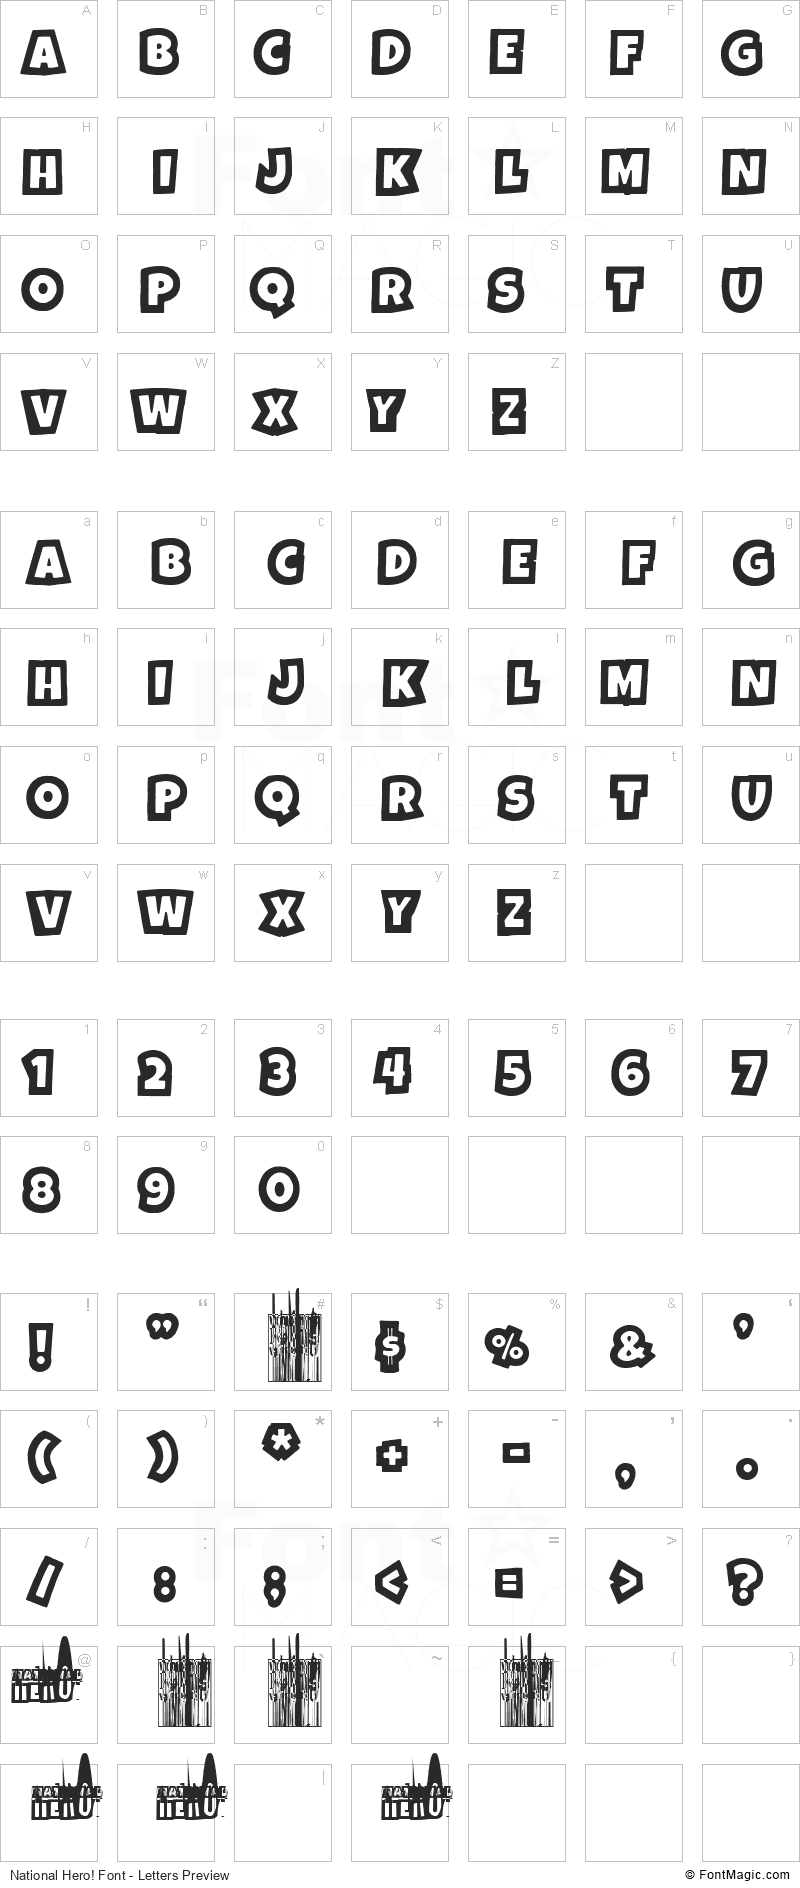 National Hero! Font - All Latters Preview Chart